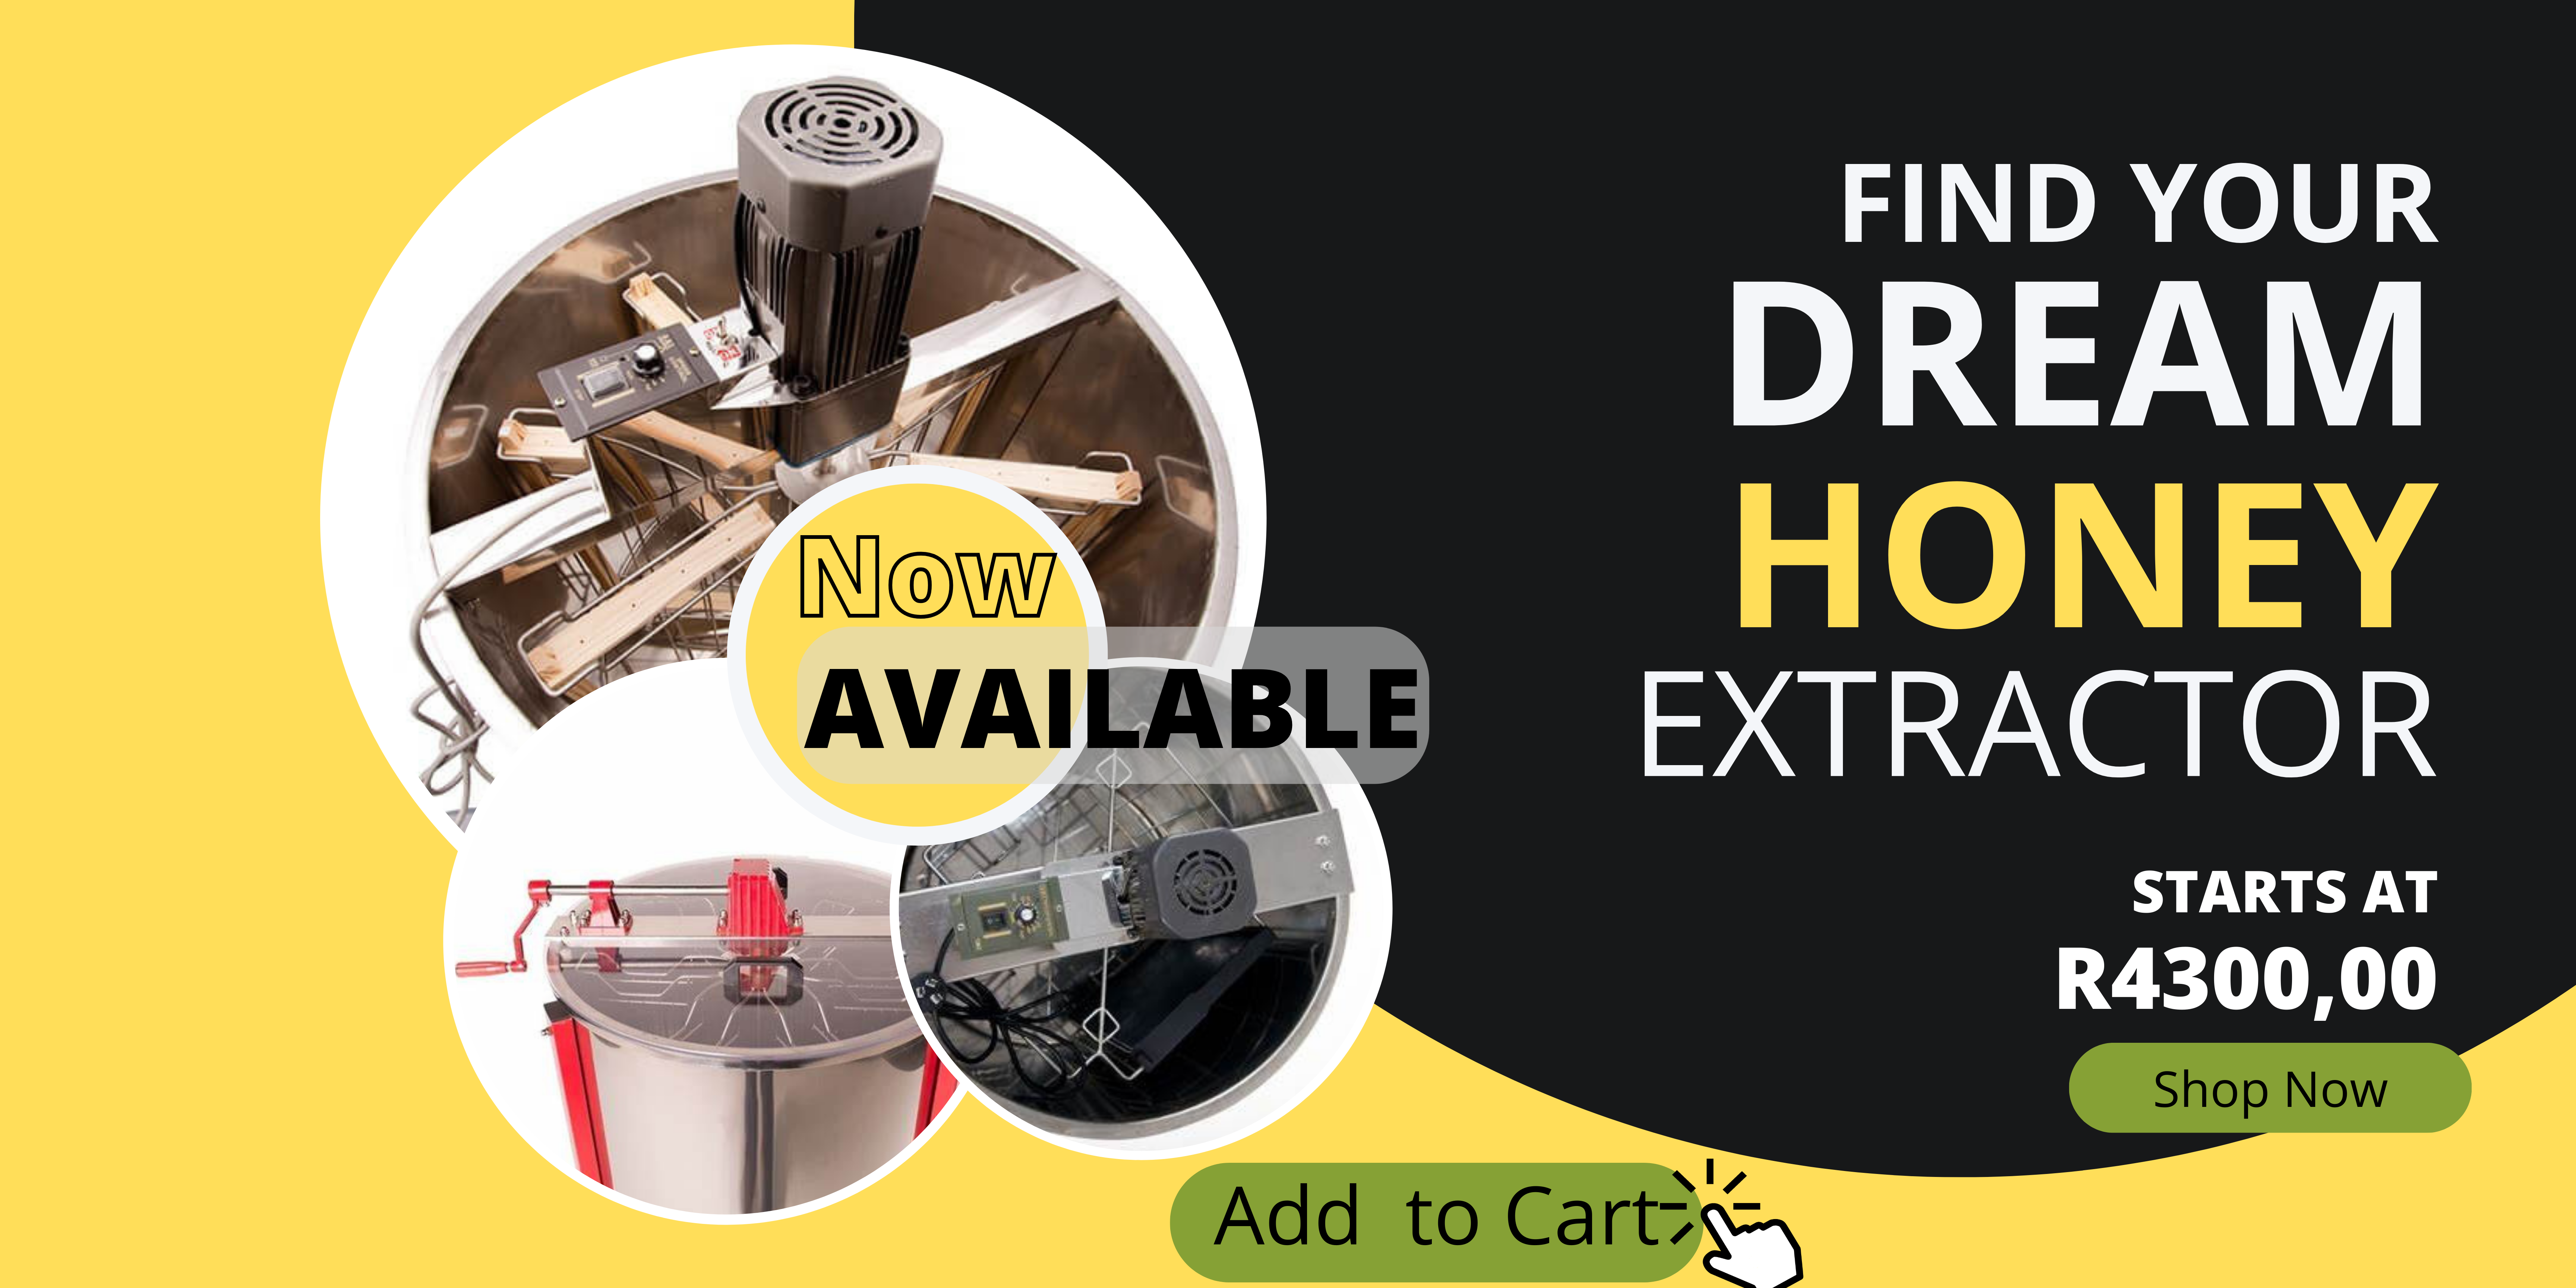 Honey Extractors Available in-store and online